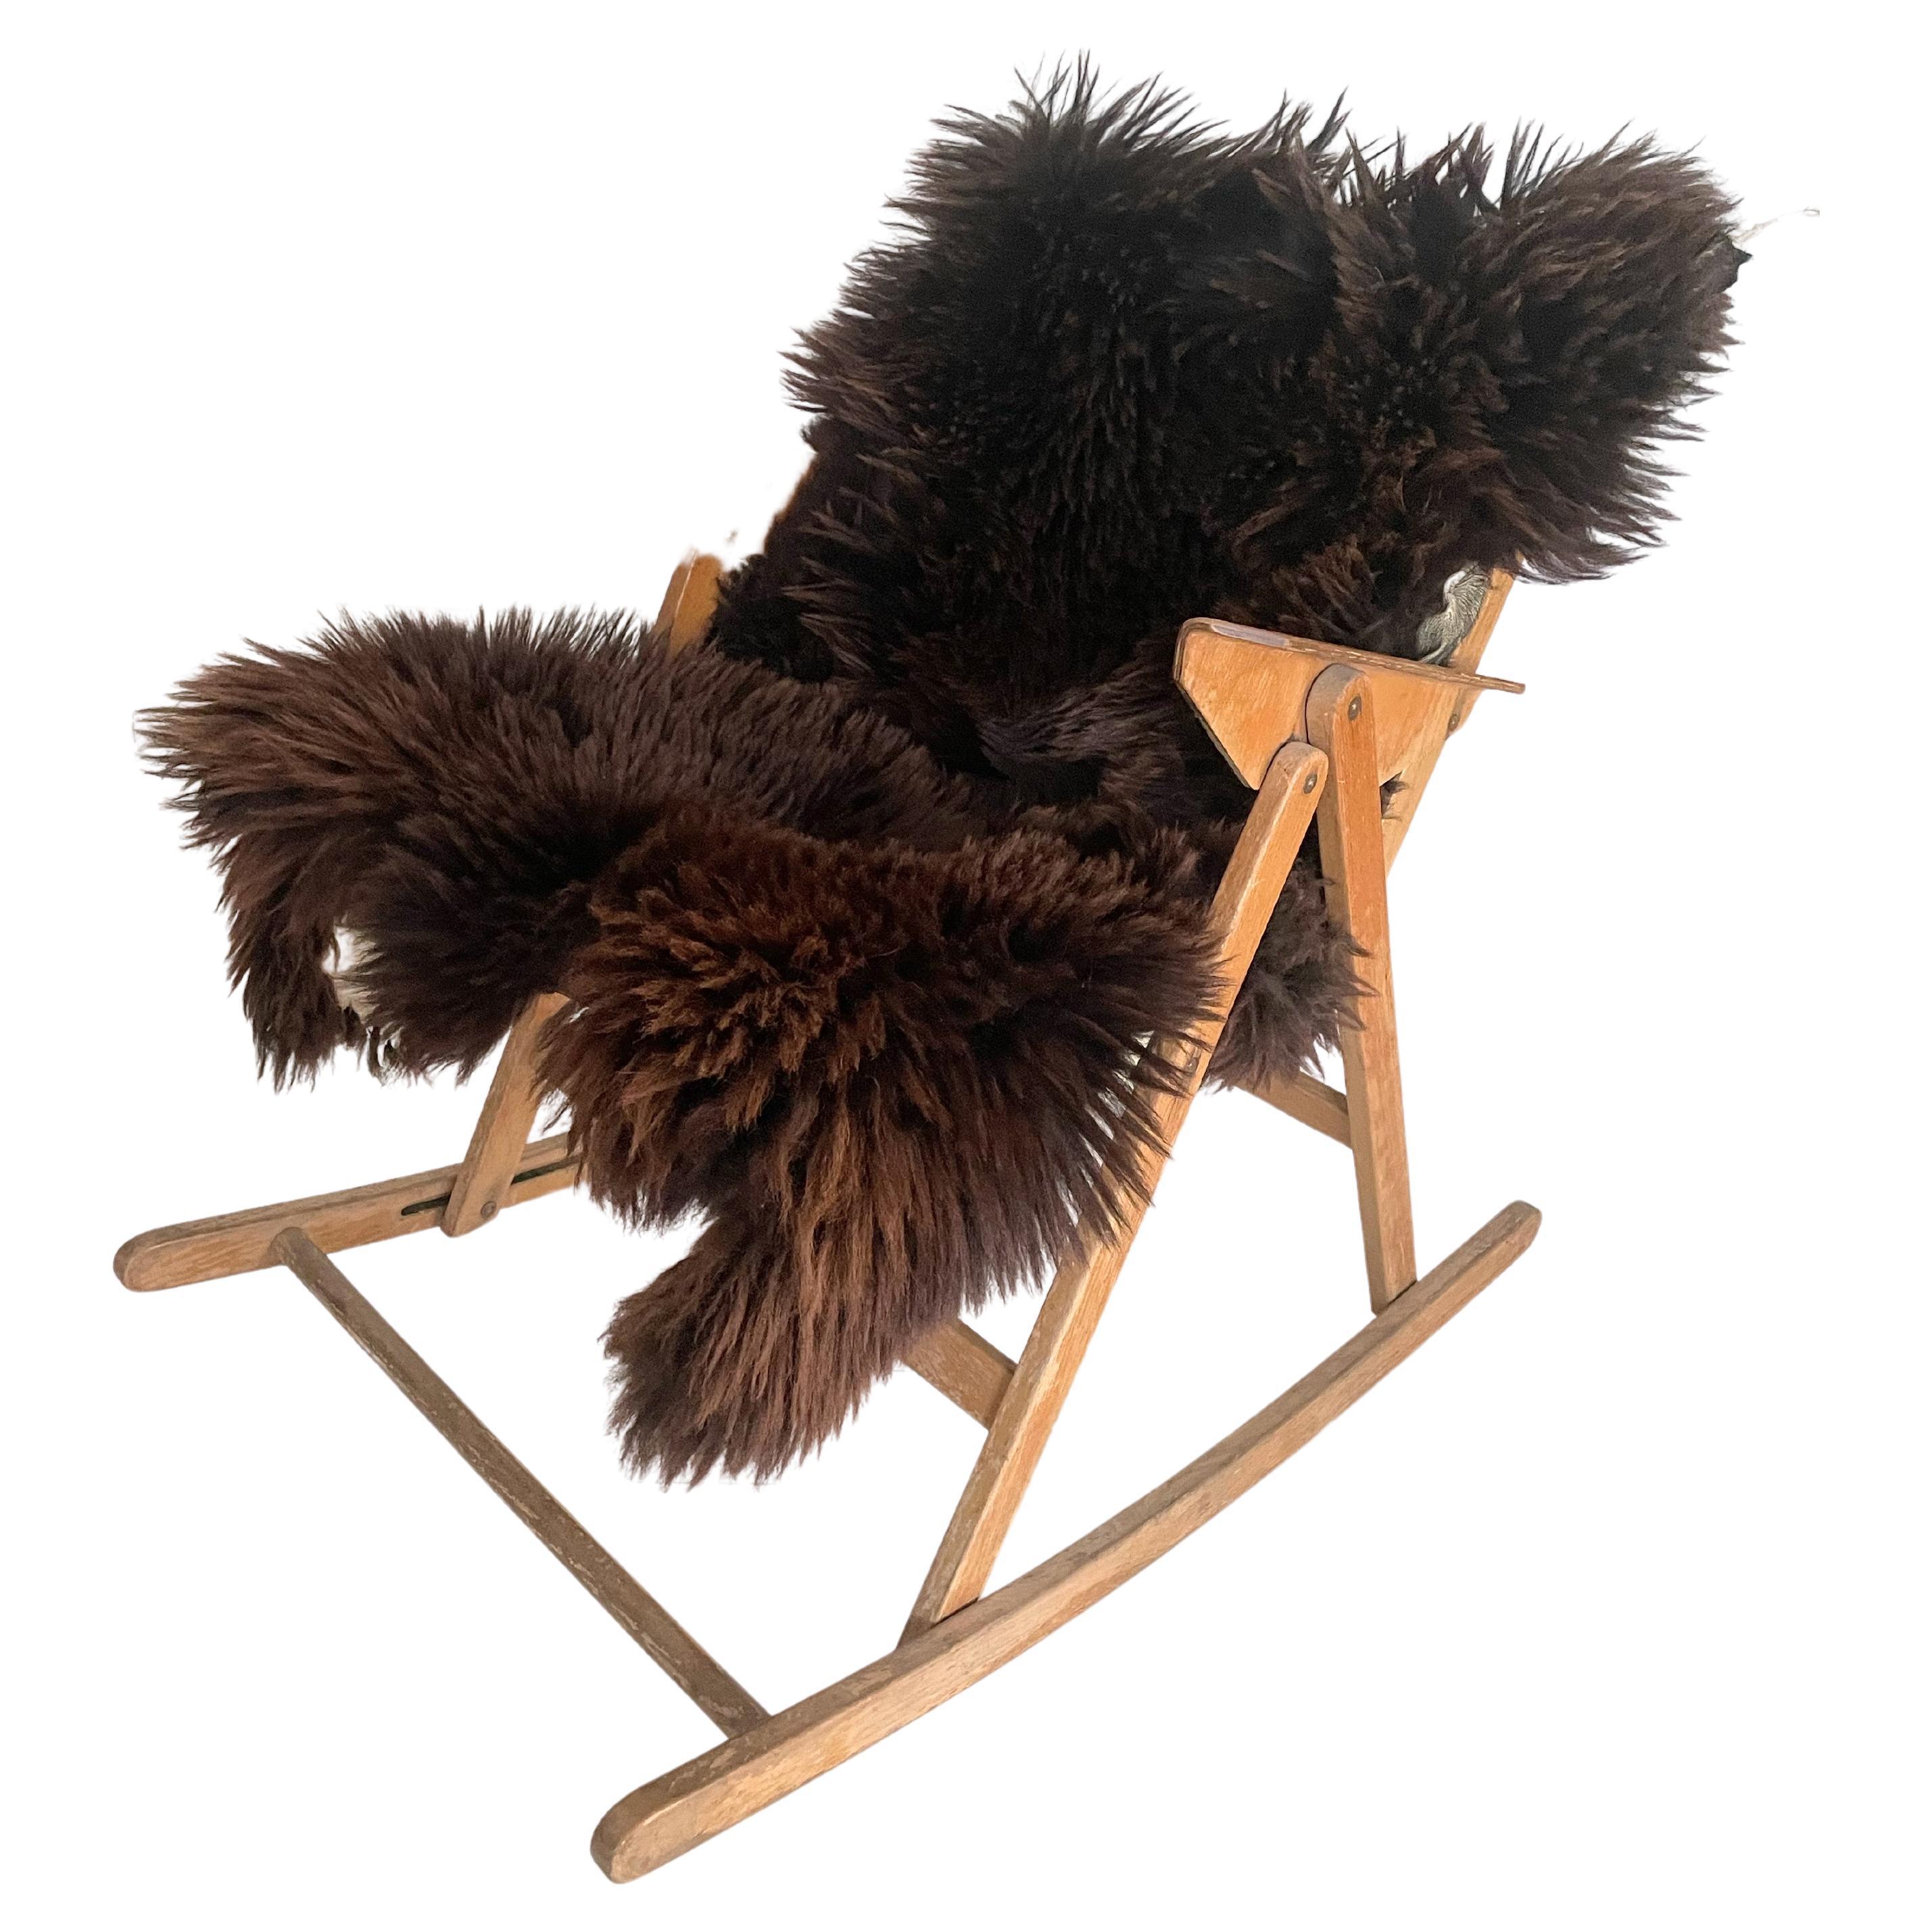 This model Rex folding rocking chair was designed by Niko Kralj in Slovenia in 1952, with this particular piece thought to have been produced during the 1960s.